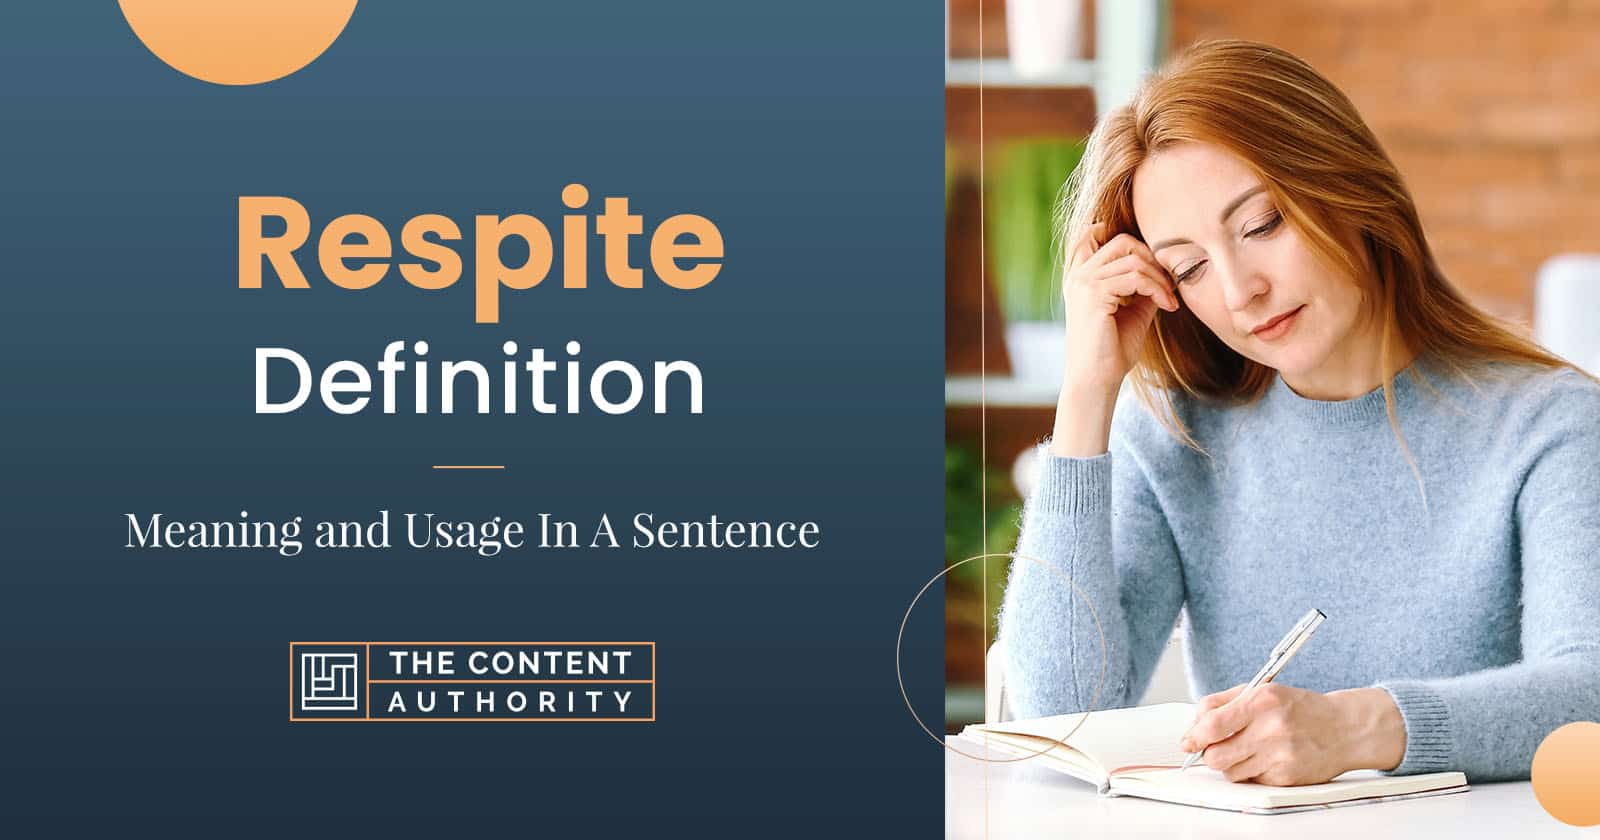 Respite Definition – Meaning and Usage In A Sentence